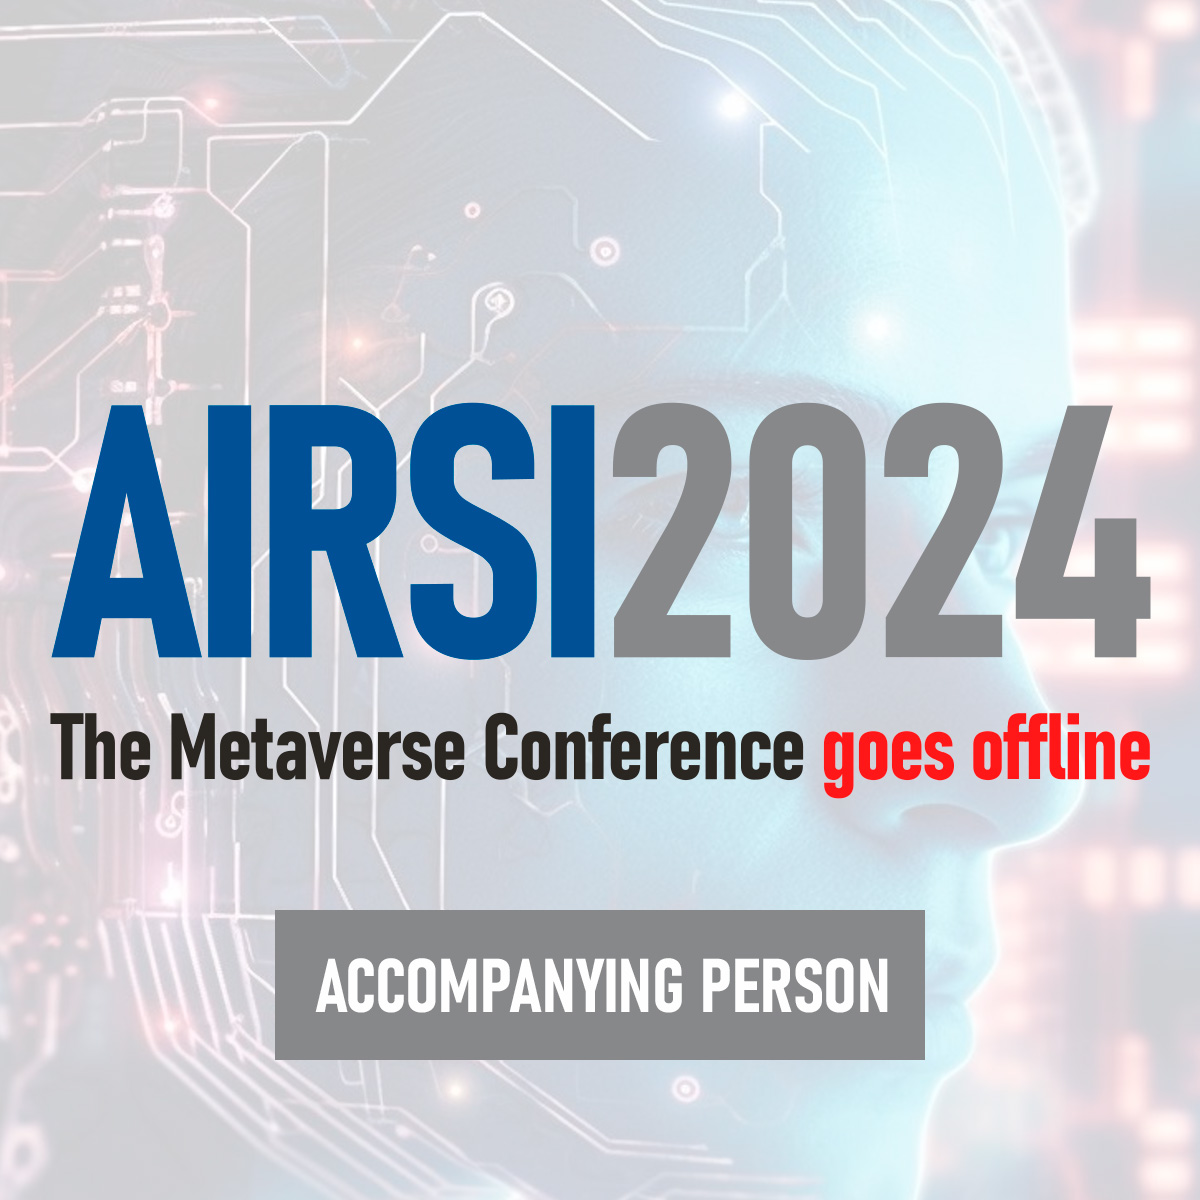 Registration AIRSI 2024 Accompanying person